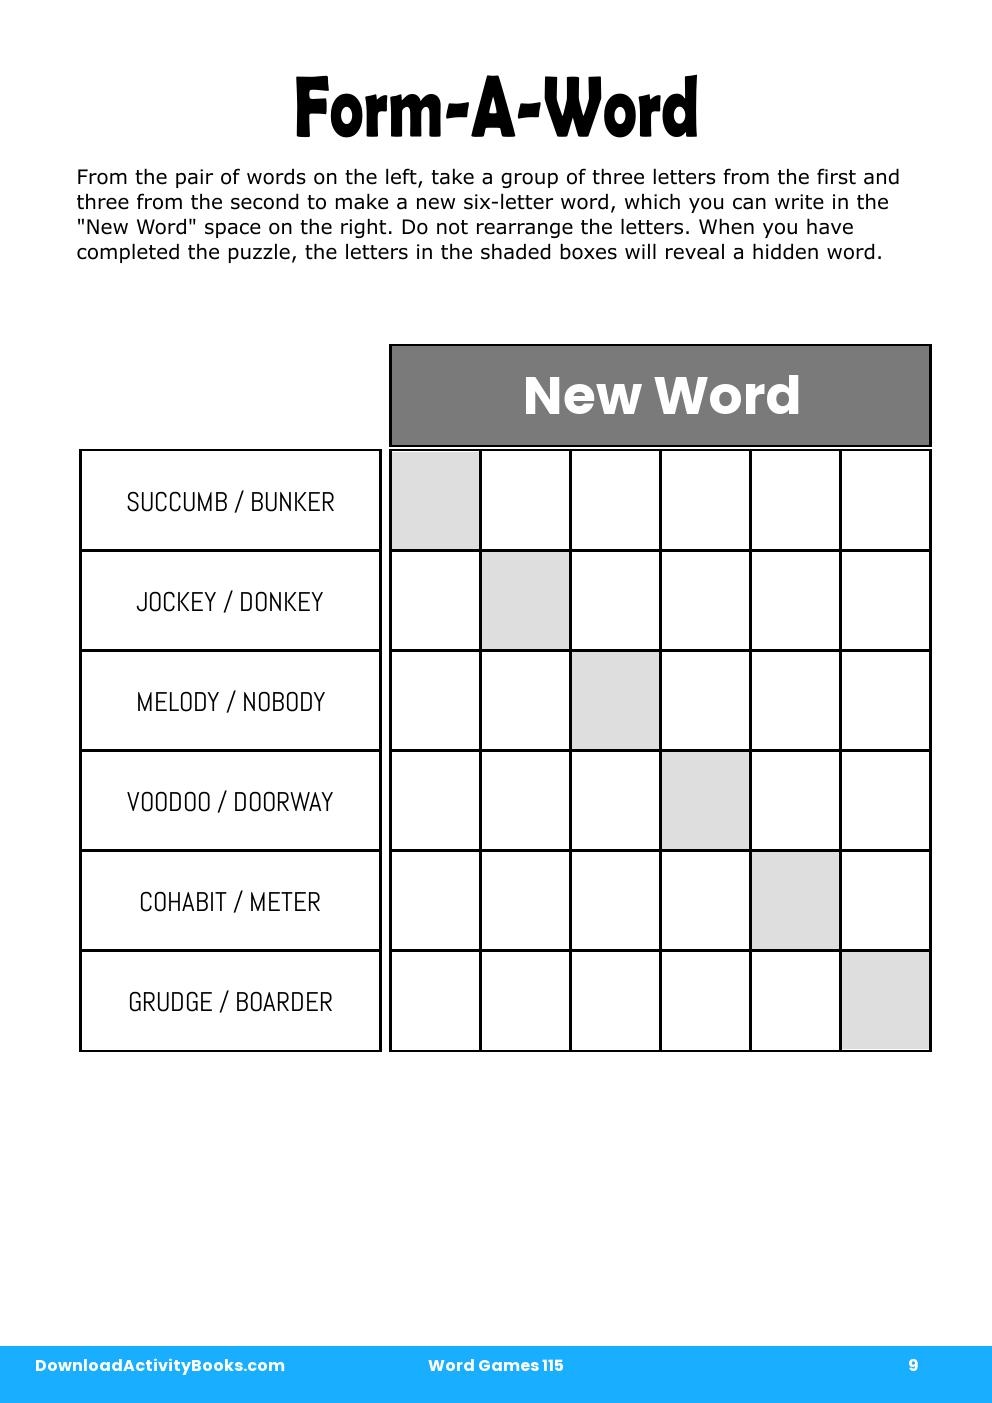 Form-A-Word in Word Games 115